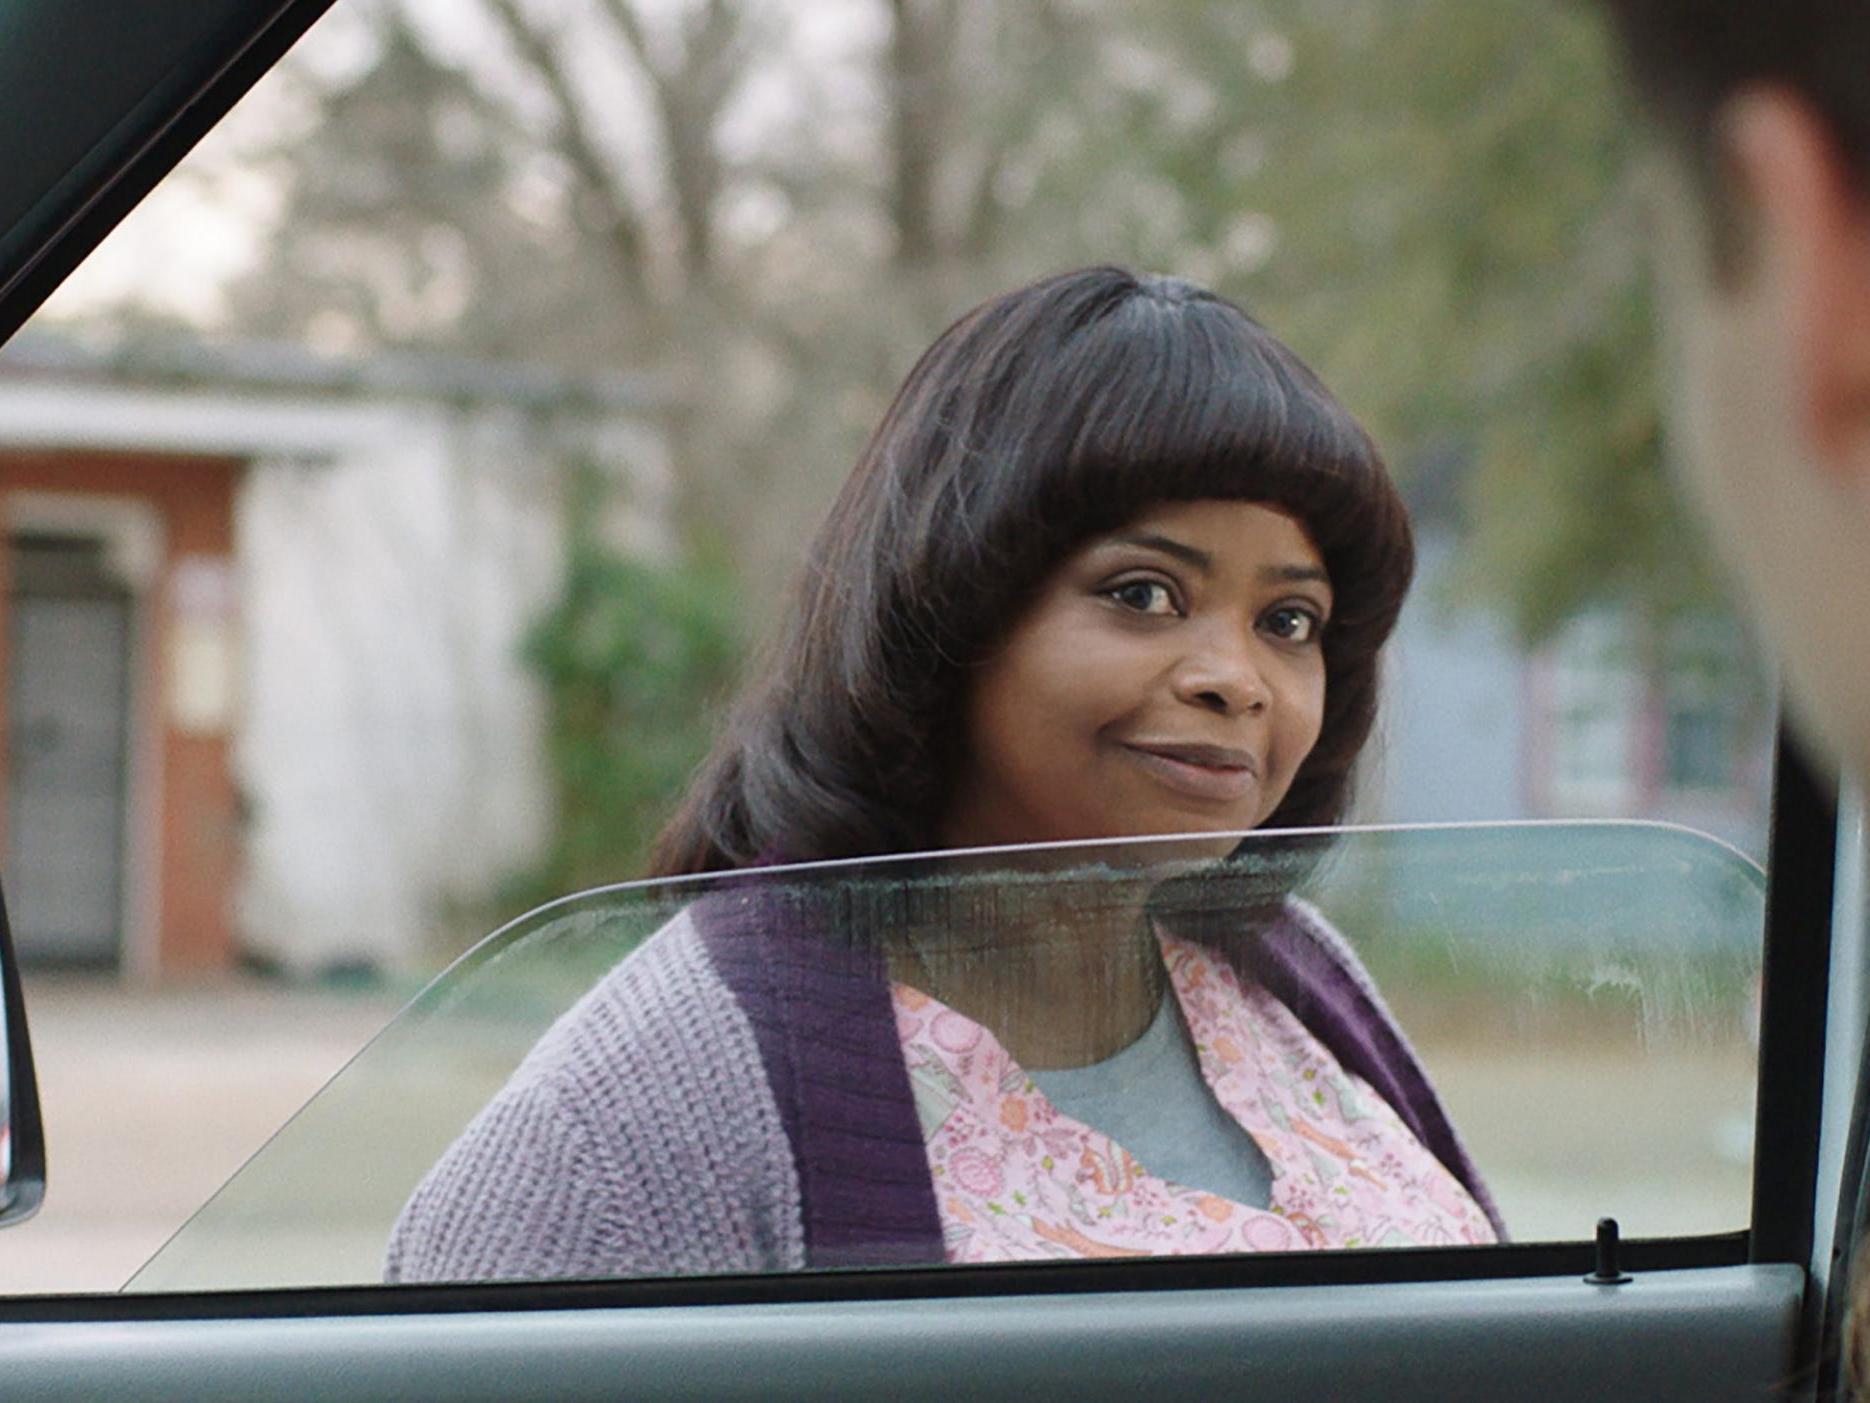 Octavia Spencer plays against type as the creepy Sue Ann in 'Ma'